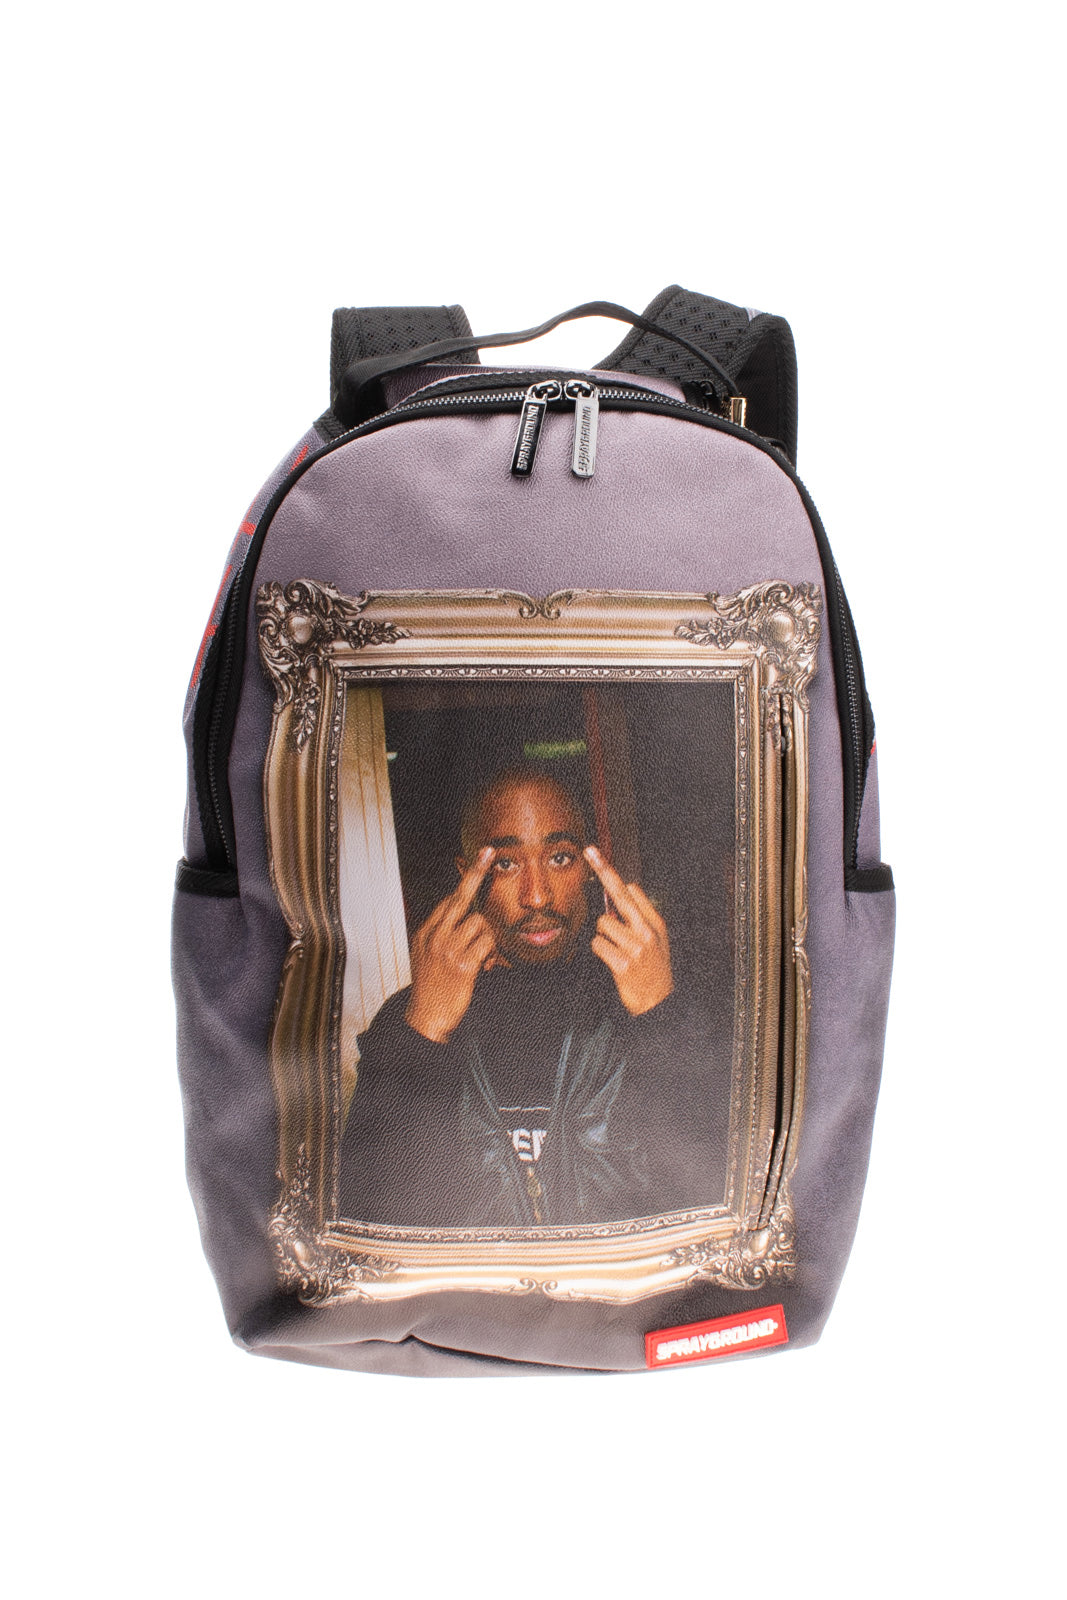 Sprayground, Bags, Biggest Backpack N The World Only 2 Made By  Sprayground